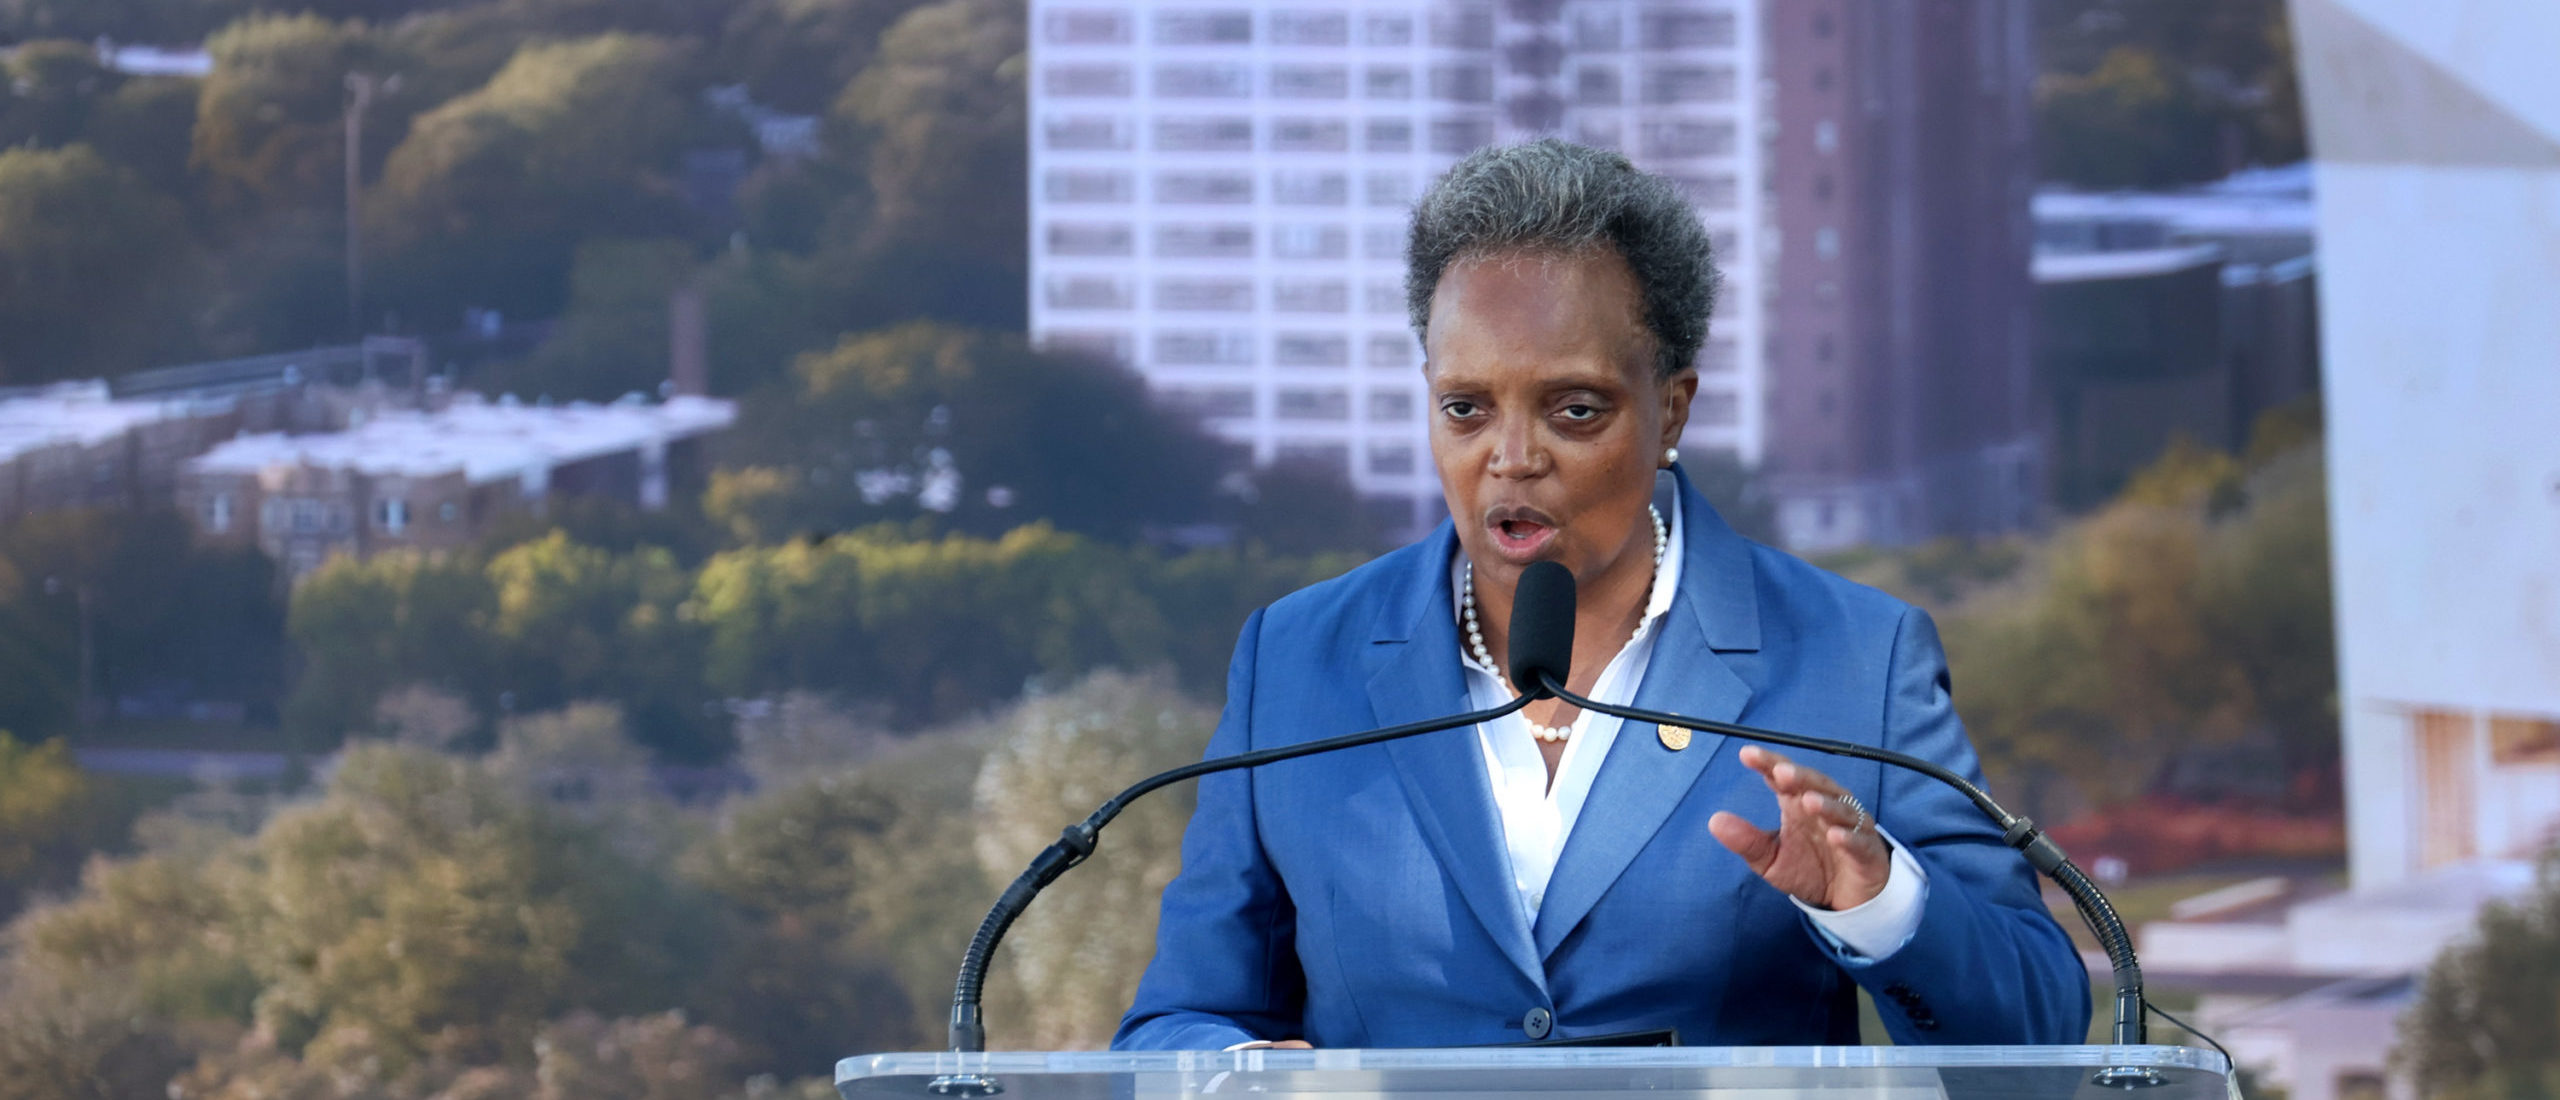 Chicago mayor Lori Lightfoot speaks during a ceremonial groundbreaking at the Obama Presidential Center in Jackson Park on September 28, 2021 in Chicago, Illinois. (Photo by Scott Olson/Getty Images)